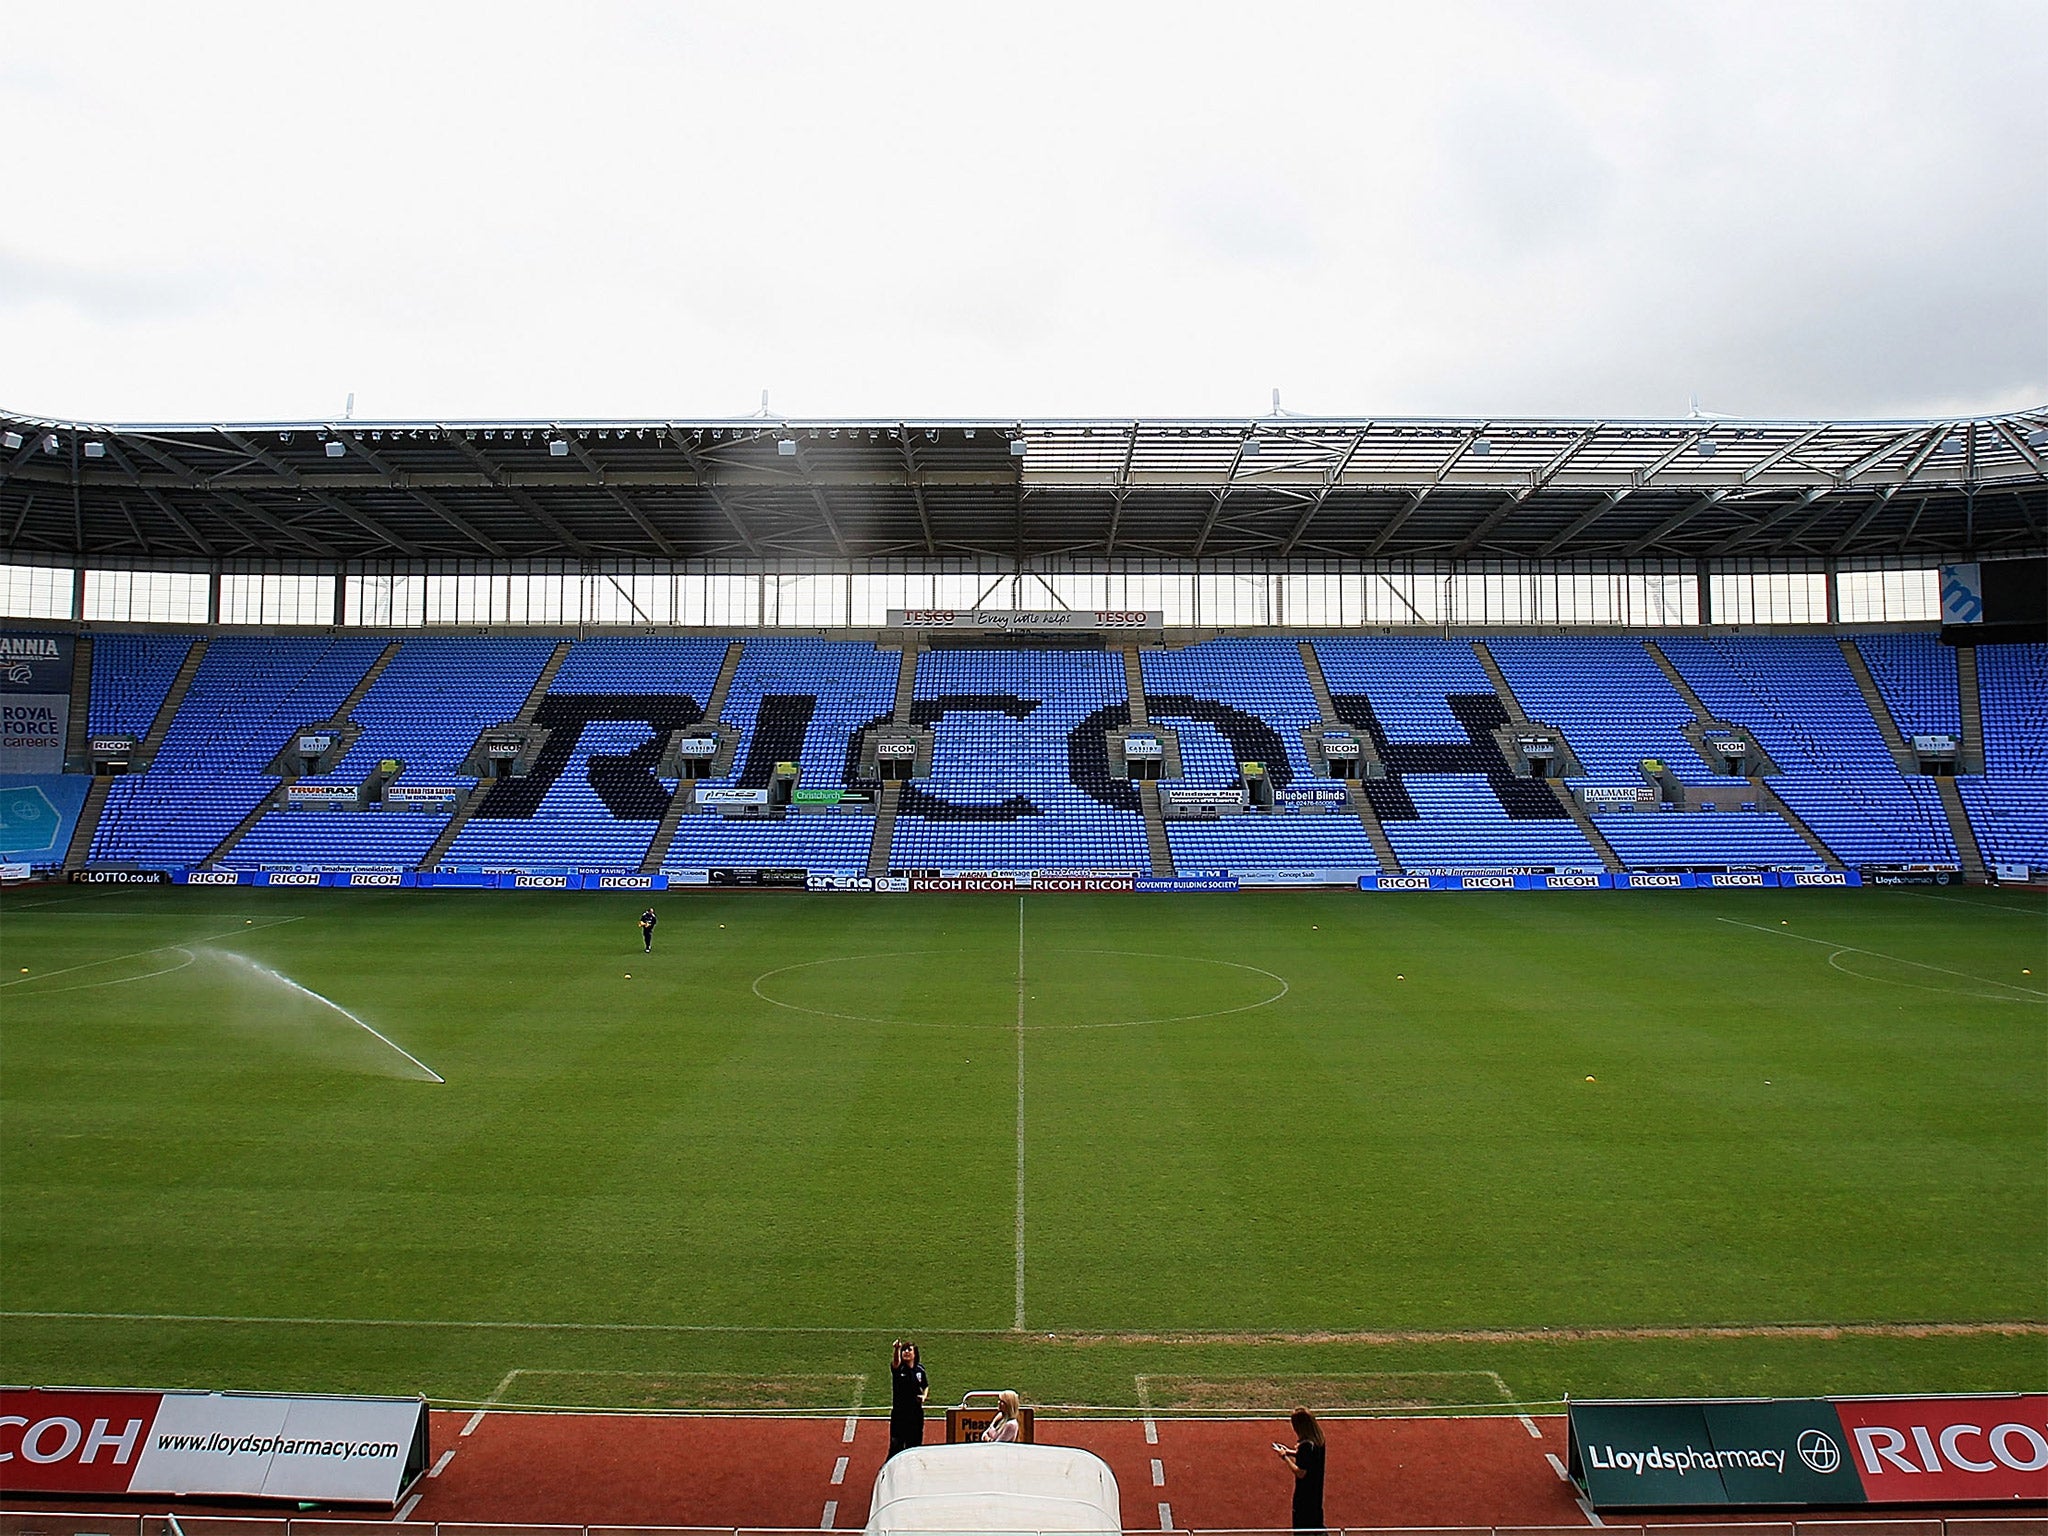 There will be a rugby-football groundshare at the Ricoh Arena